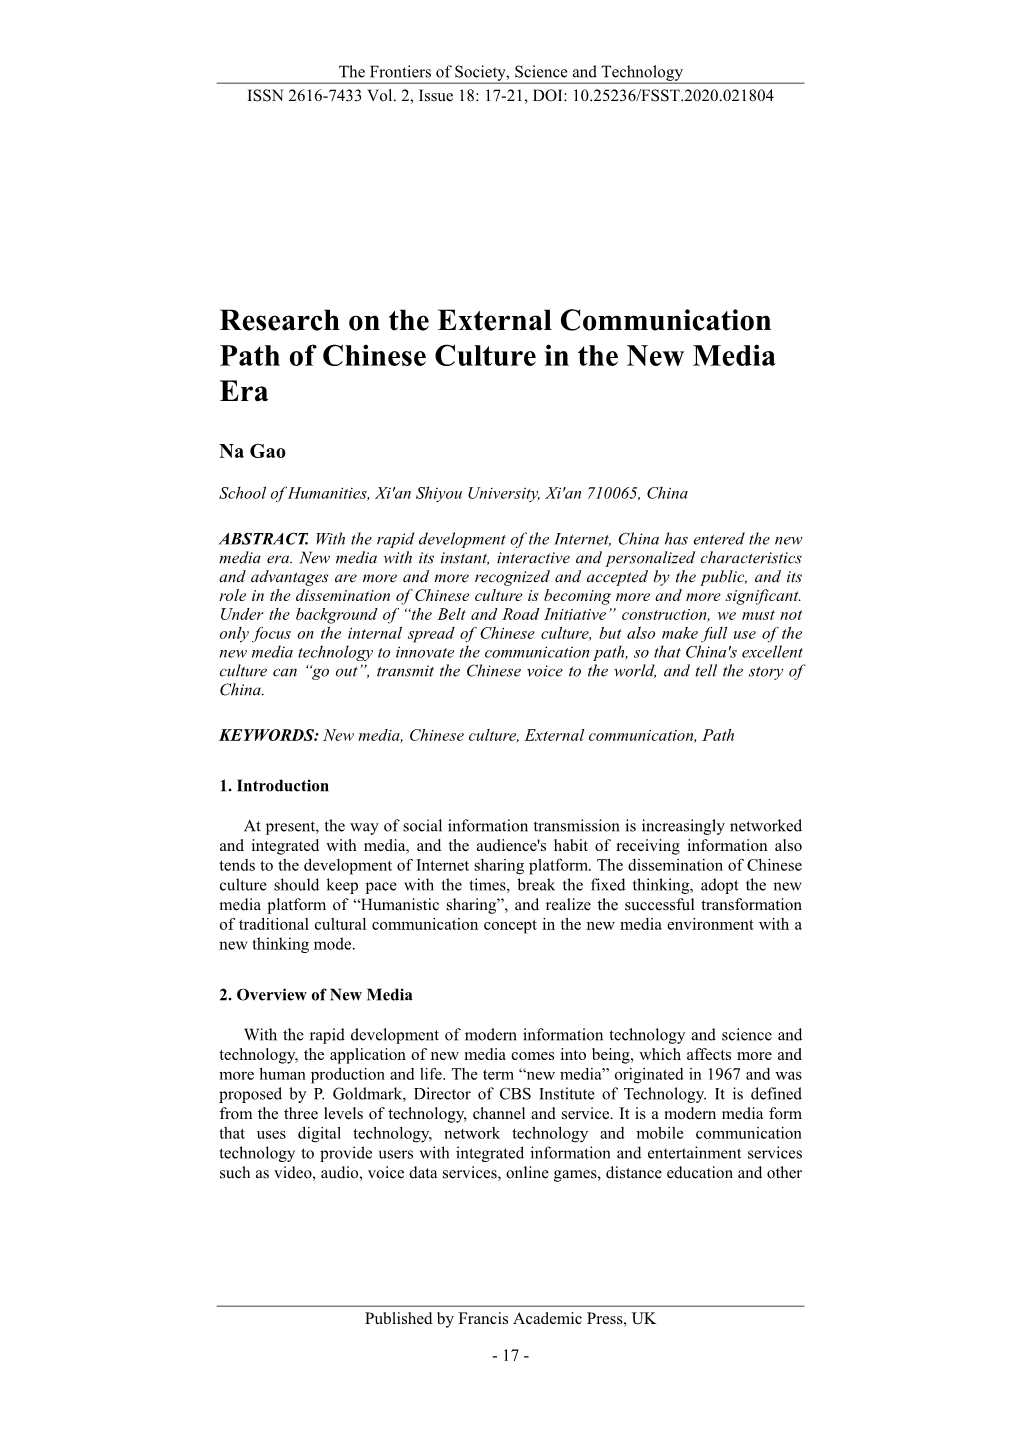 Research on the External Communication Path of Chinese Culture in the New Media Era